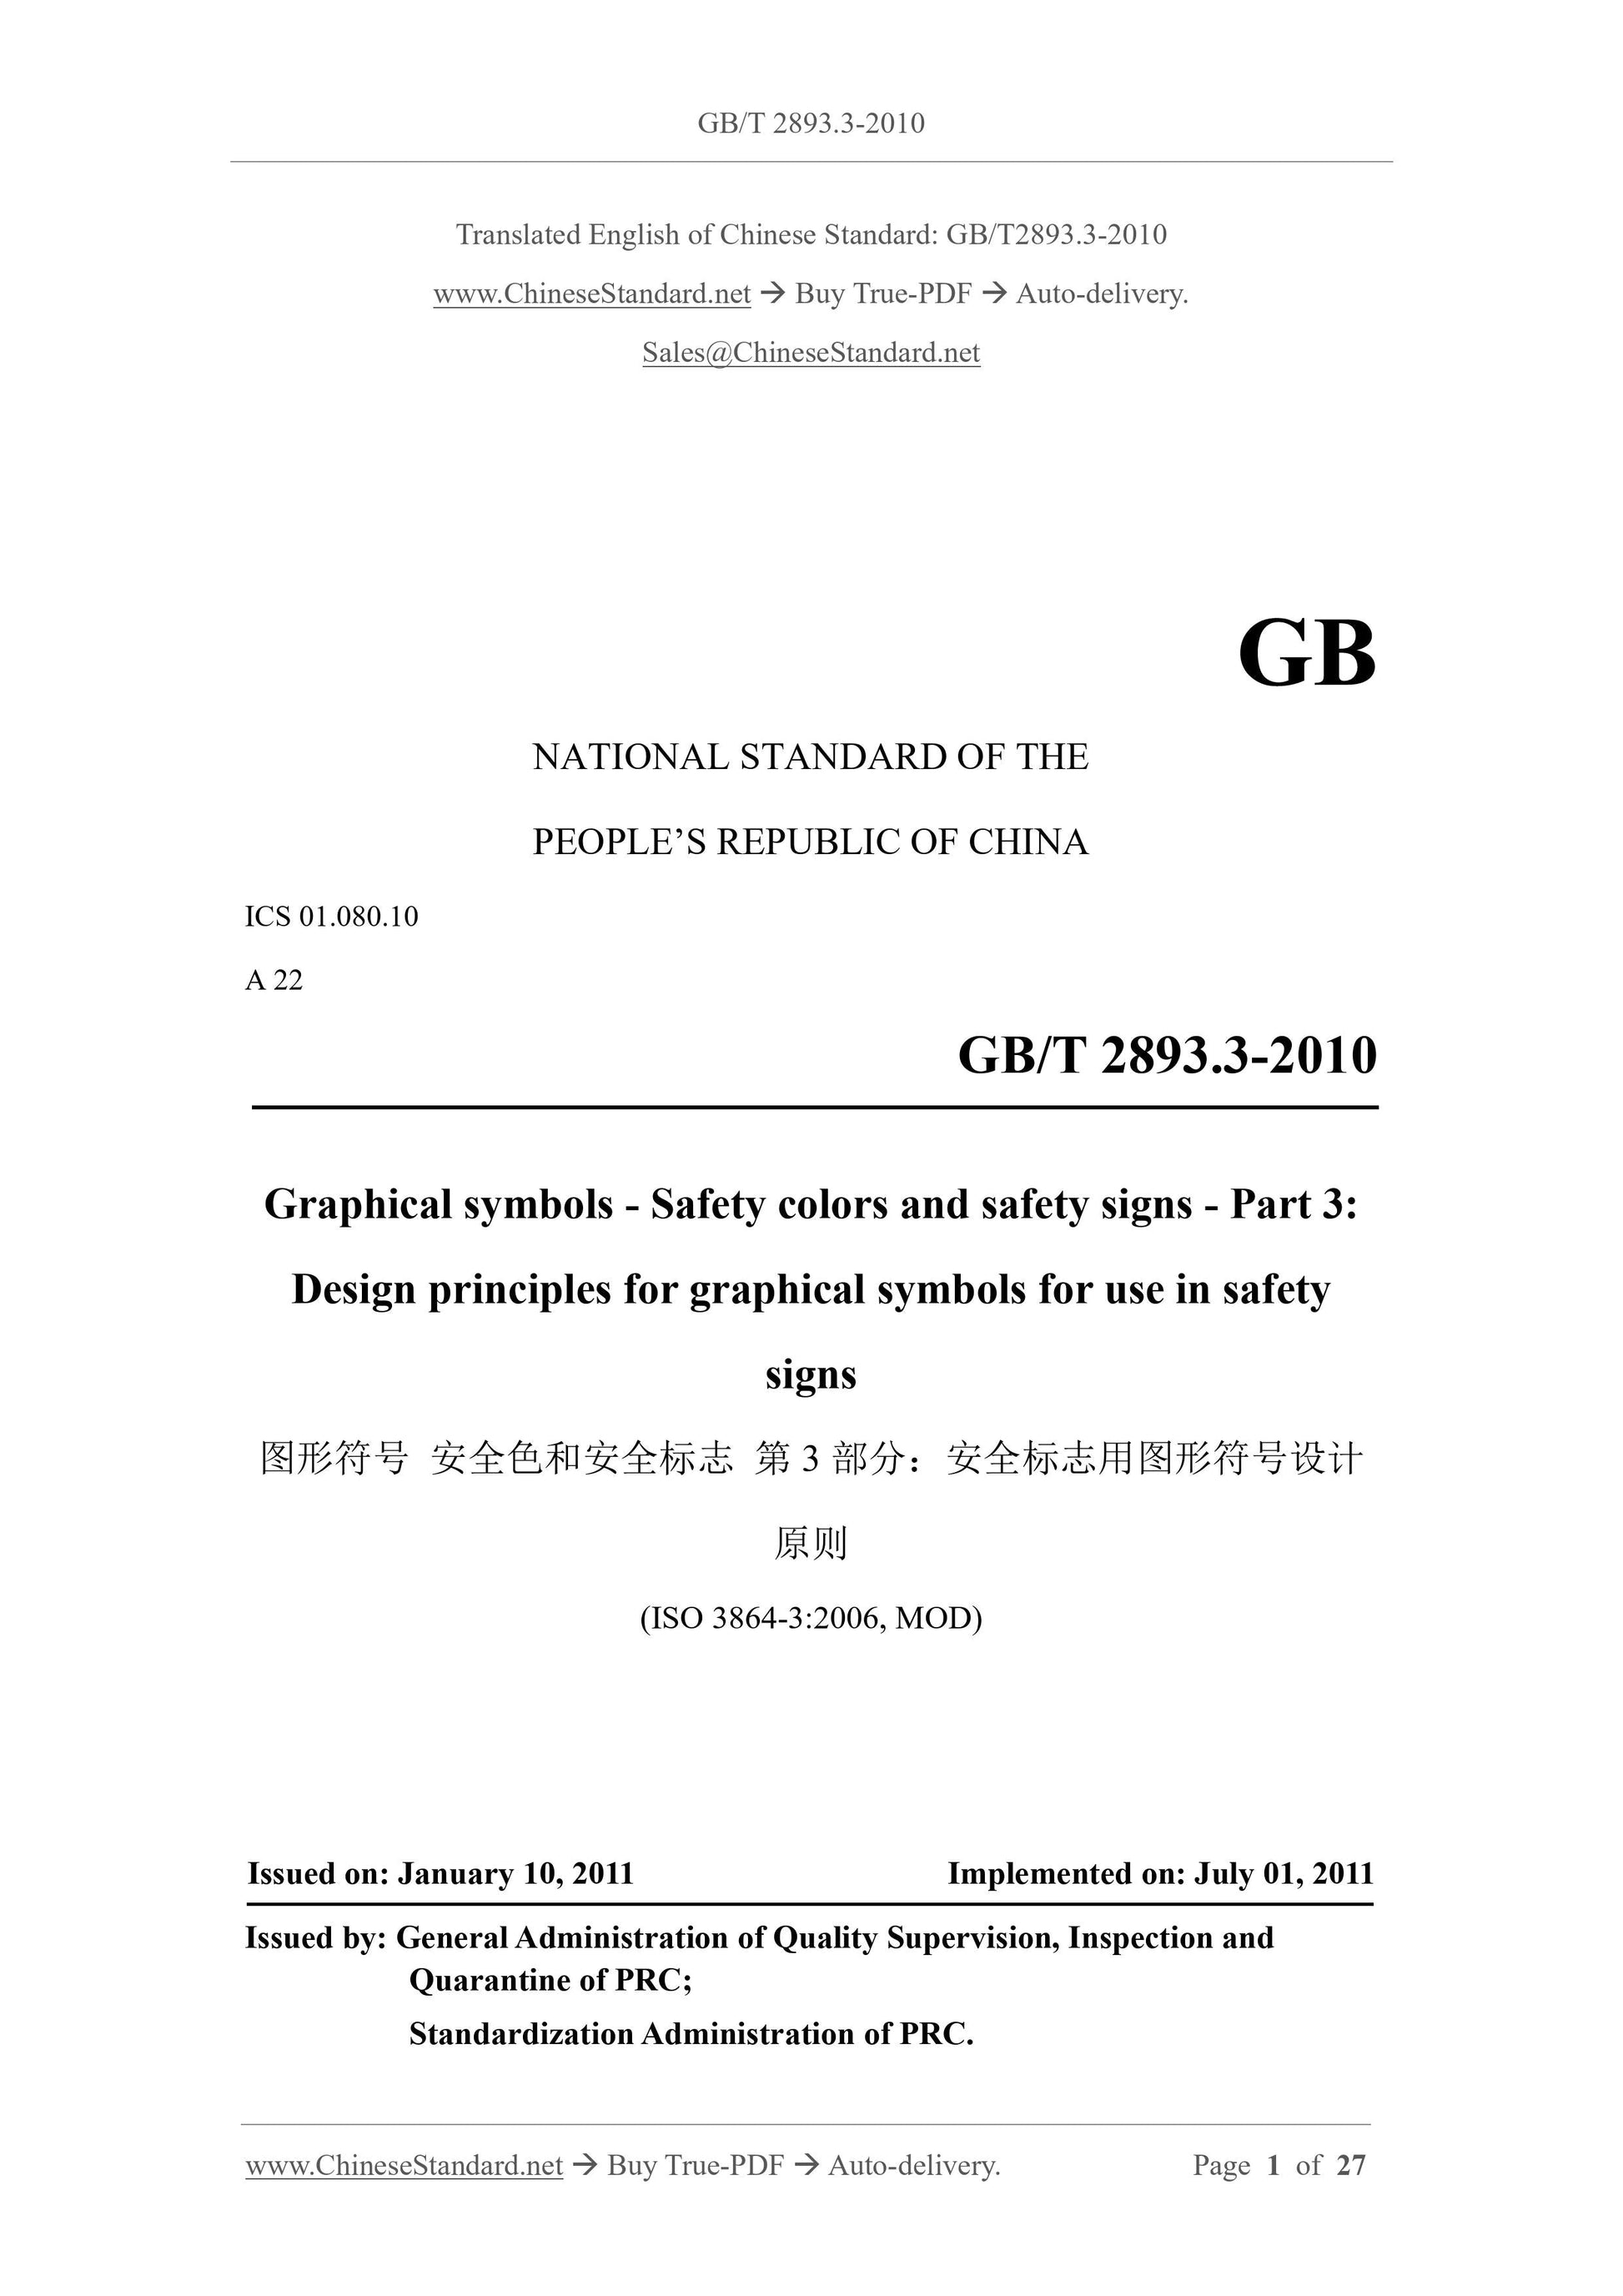 GB/T 2893.3-2010 Page 1